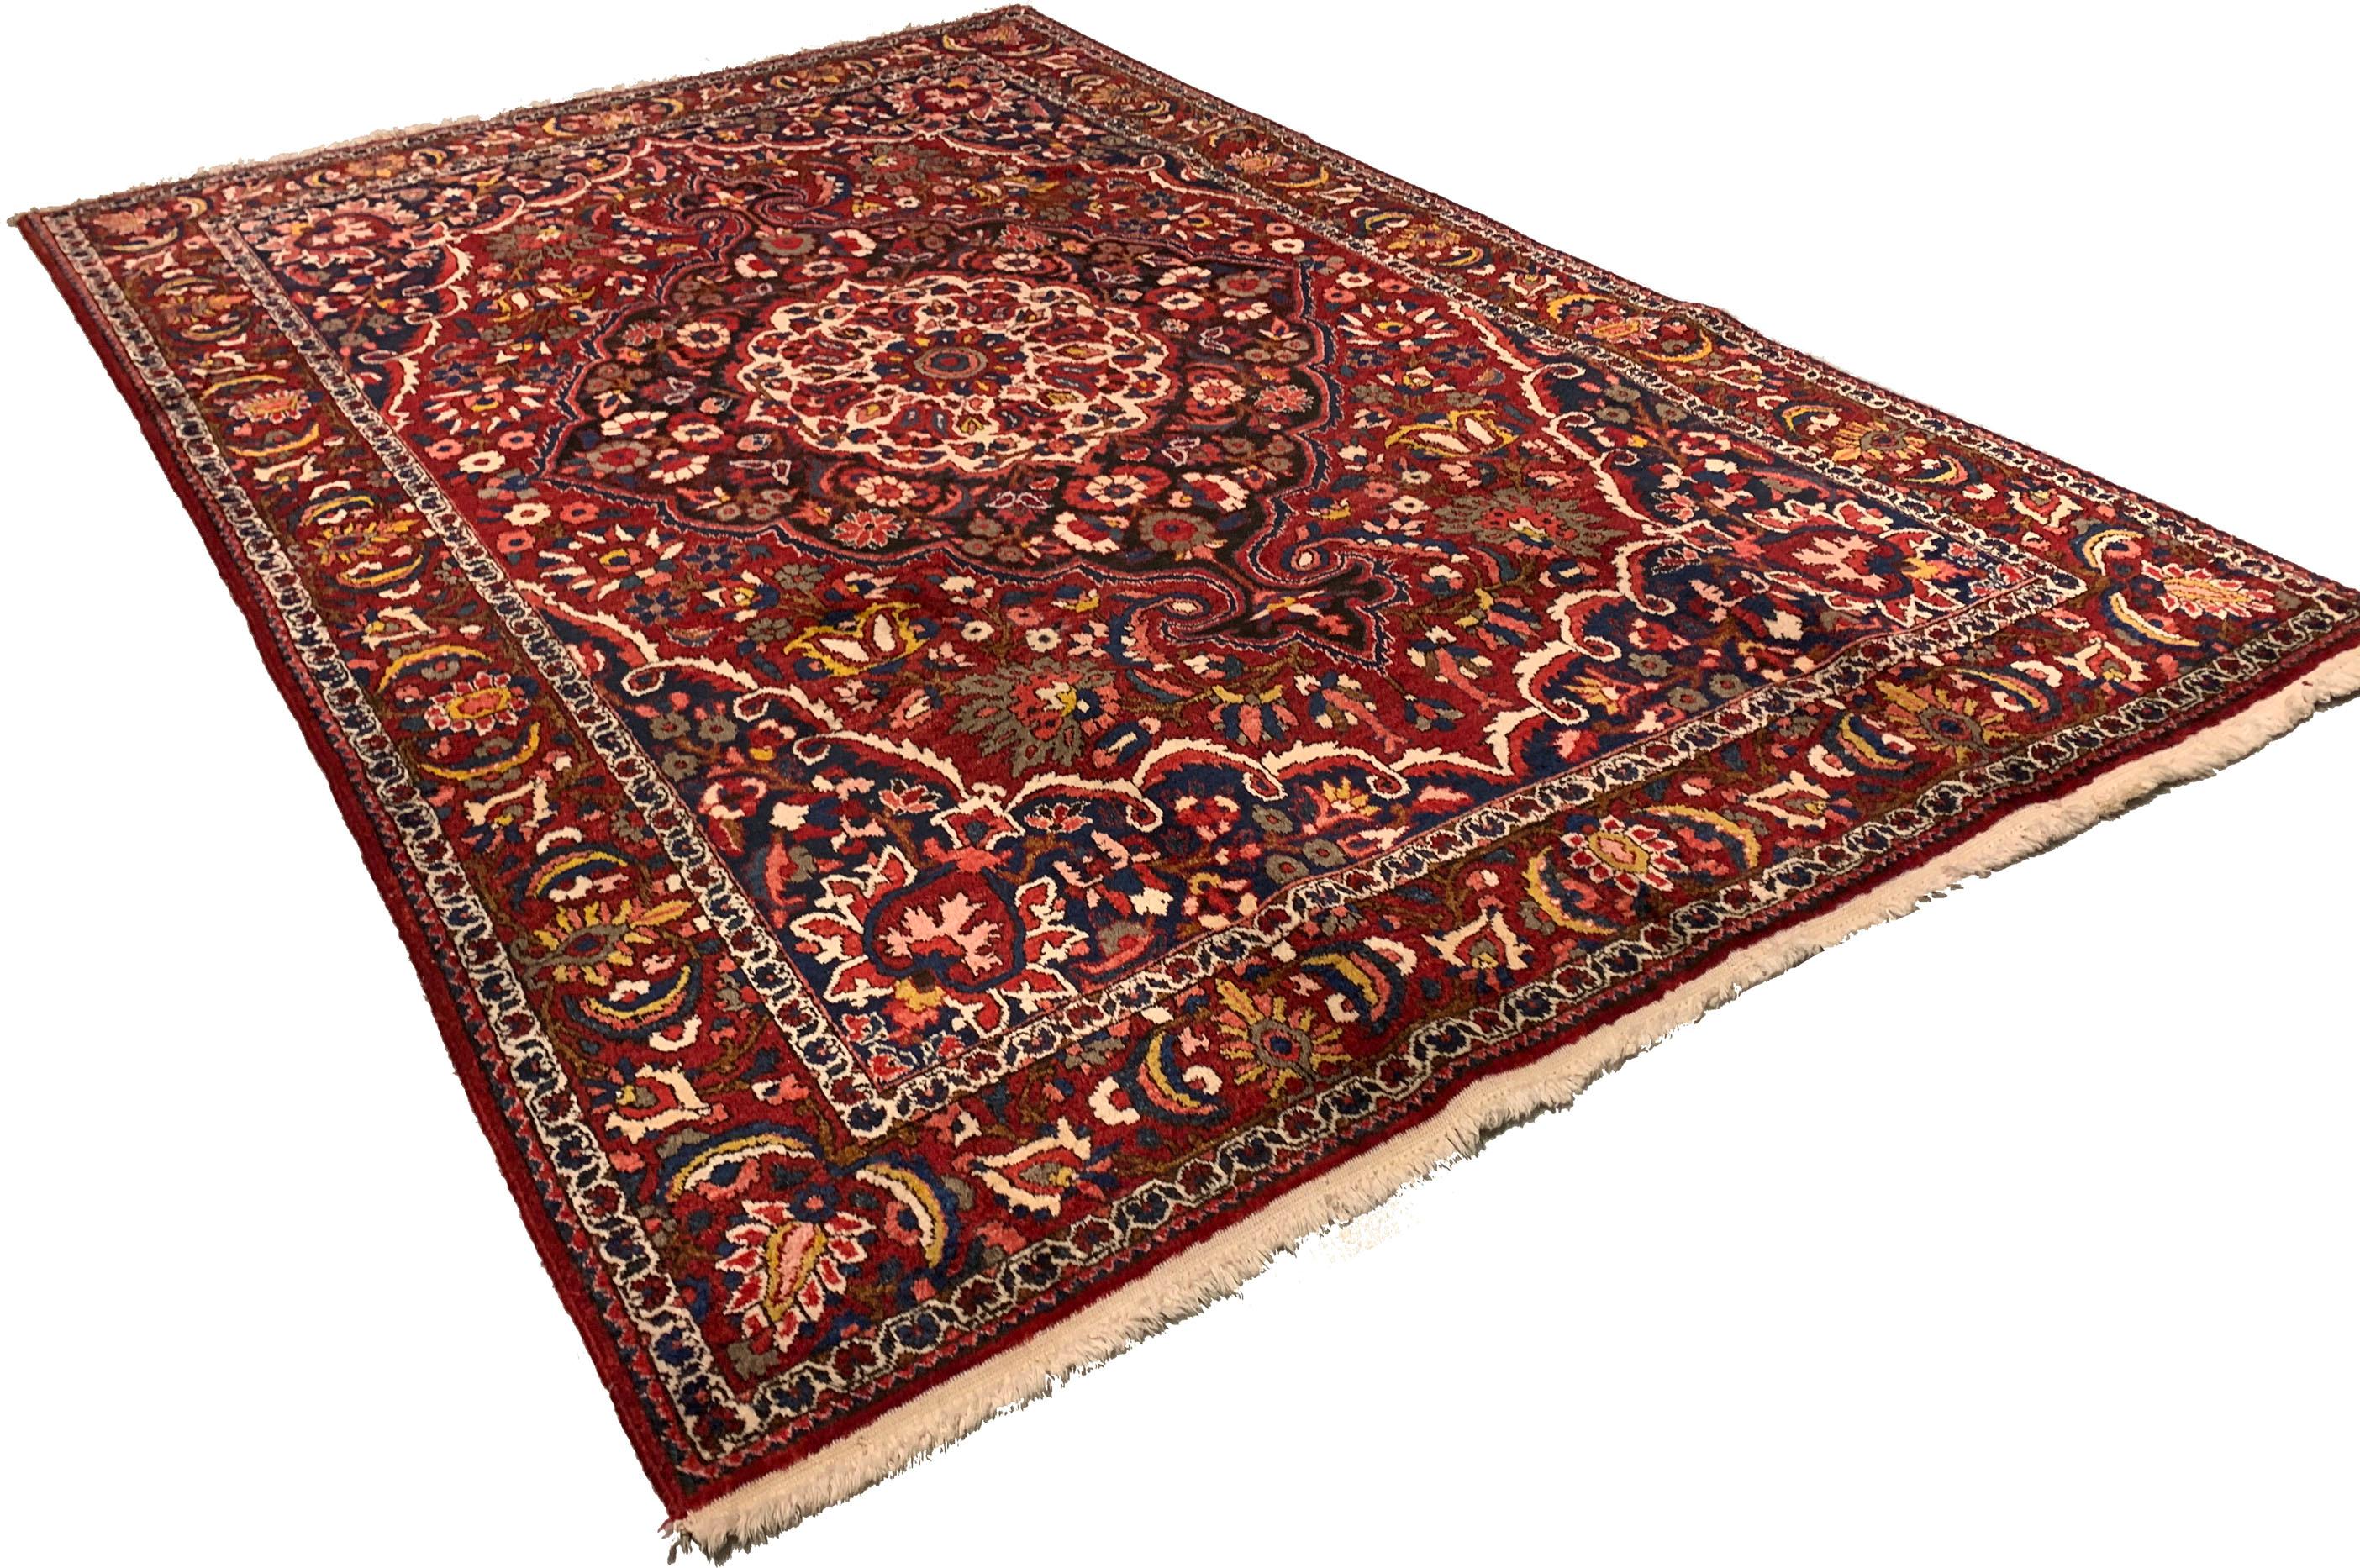 Vintage Persian Baktiari Area rug, 6'9 x 10'1. The Baktiari area (Chahar Mahal), in central Persia near Isfahan, produces both village and nomadic rugs with bright colors, allover lattice patterns and sturdy constructions. Antique rugs have been